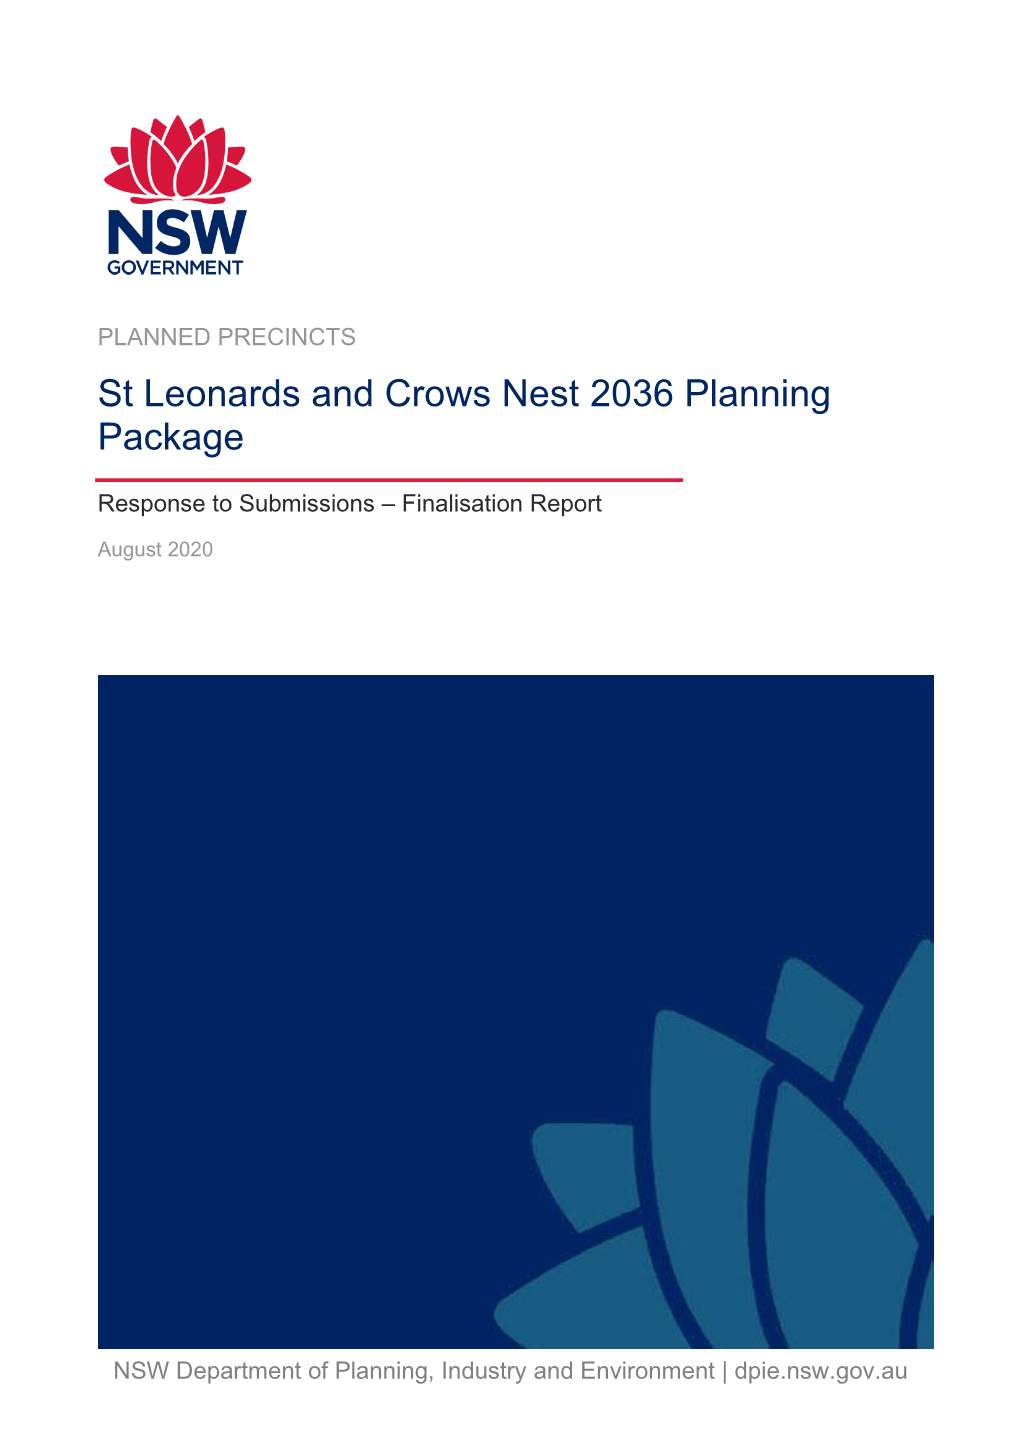 St Leonards and Crows Nest 2036 Planning Package